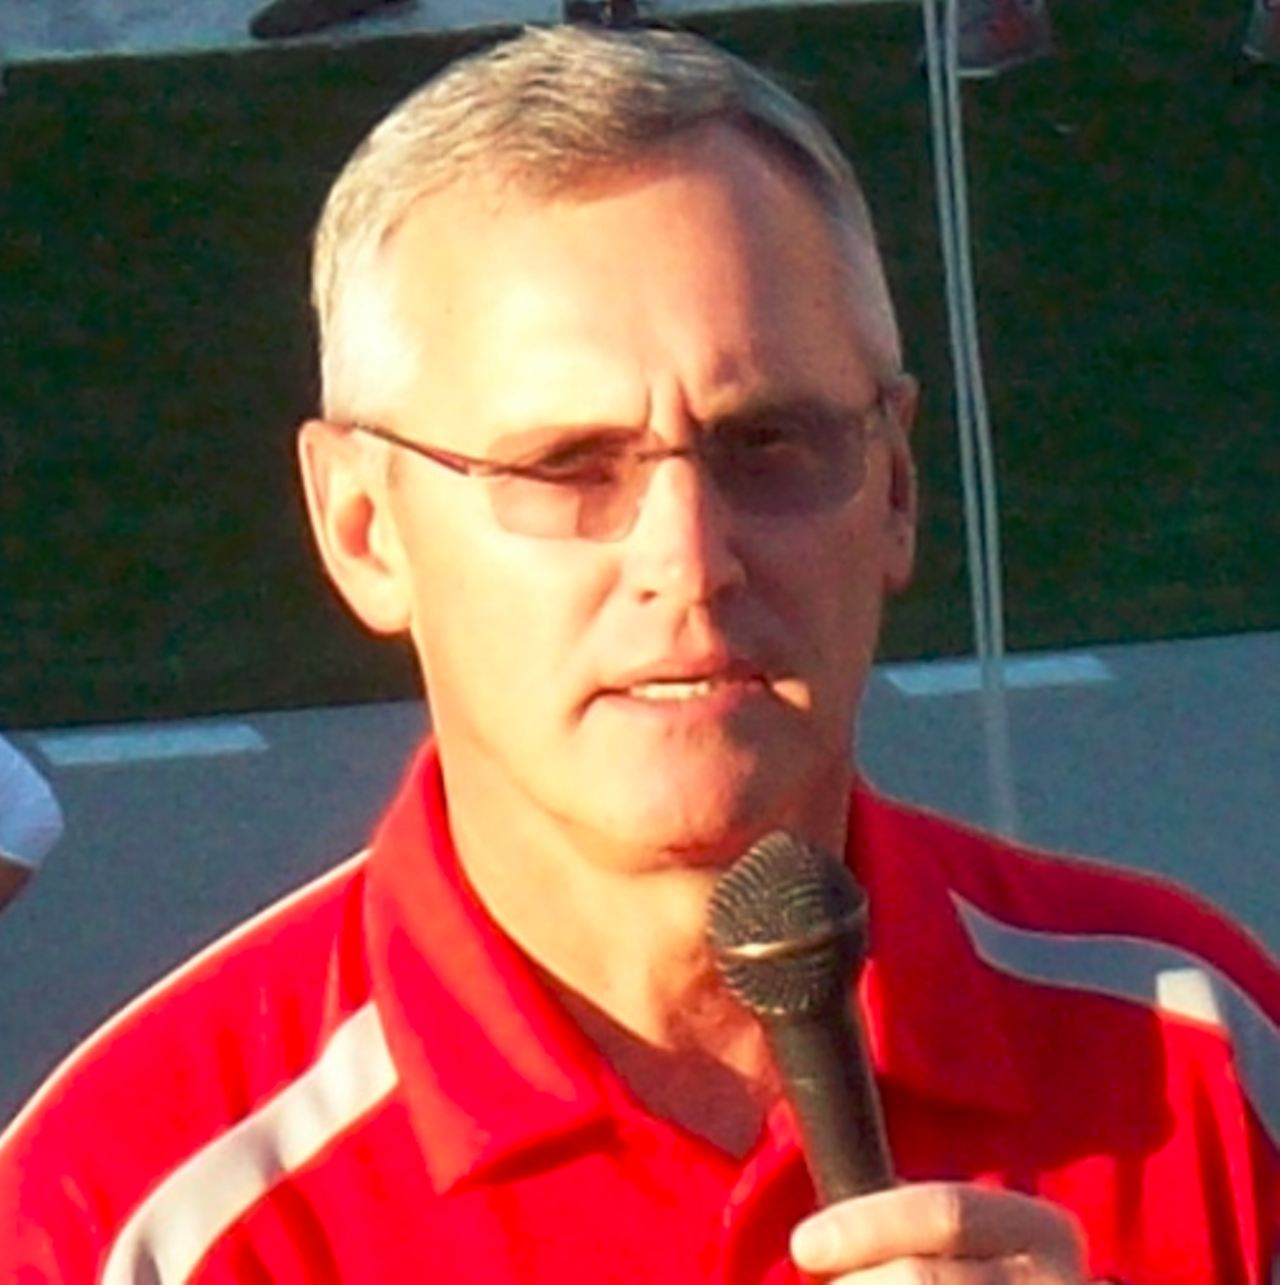 The former OSU football coach has just been installed as president of Youngstown State University. He graduated from BW in 1975 after starting as QB for the football team, which his father, Lee Tressel, coached. (Tressel’s mother was also the athletic historian at BW at the time).